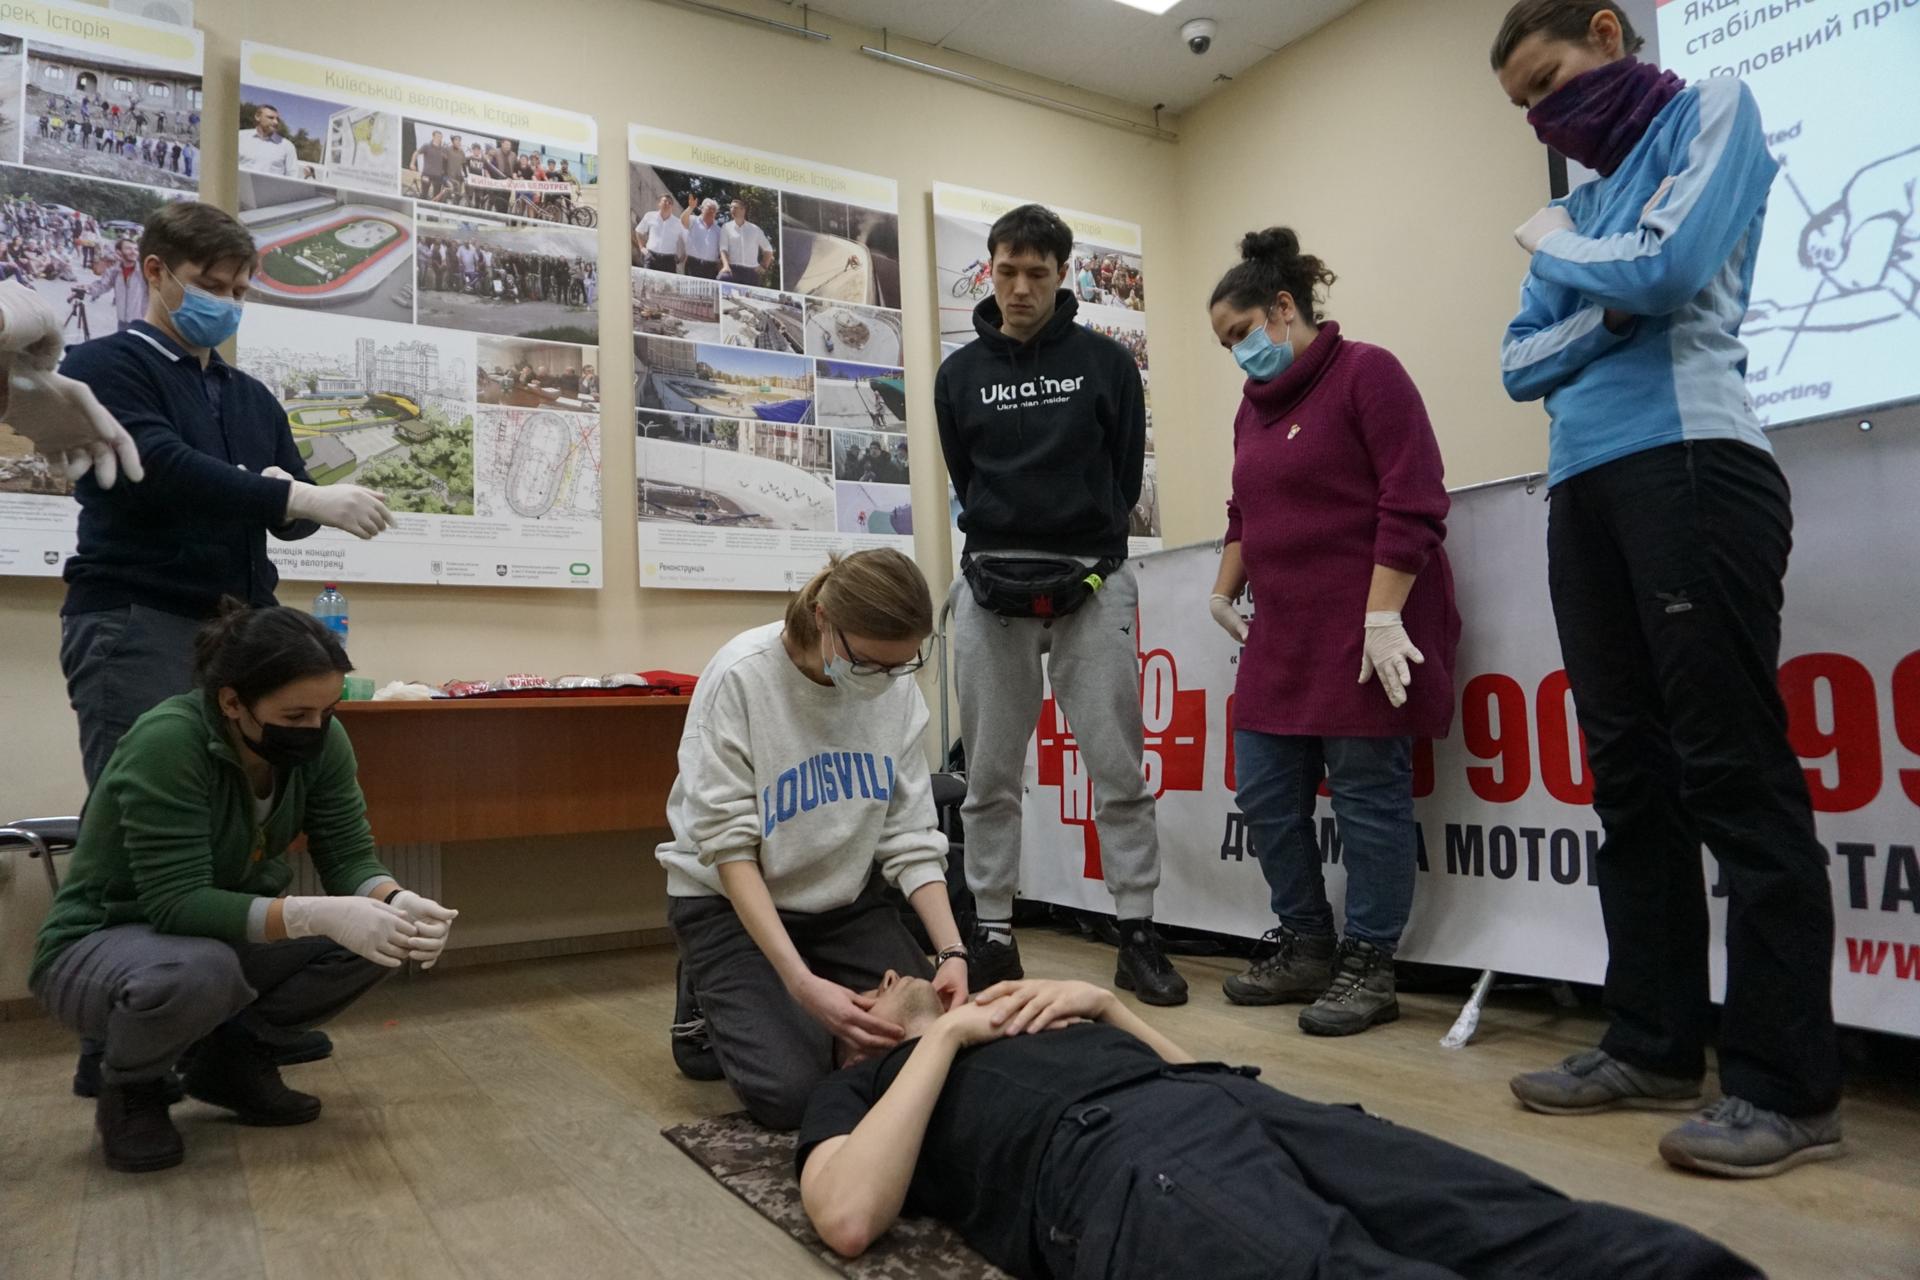 CPR and first-aid classes in Kyiv, Ukraine, are filling up fast as people prepare for possible war with Russia.